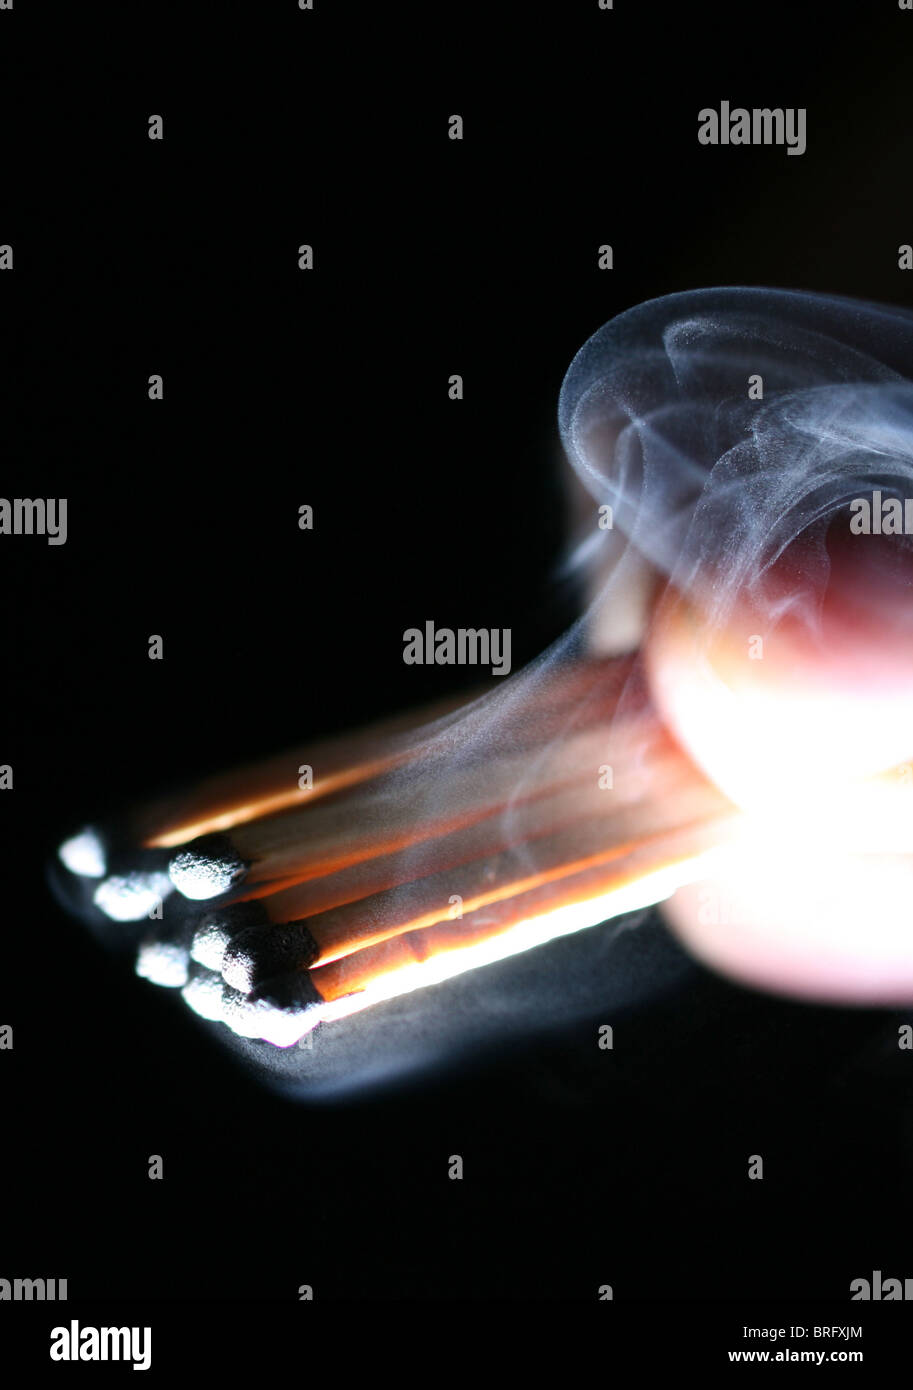 Head is flaring showing flame, on black background Stock Photo